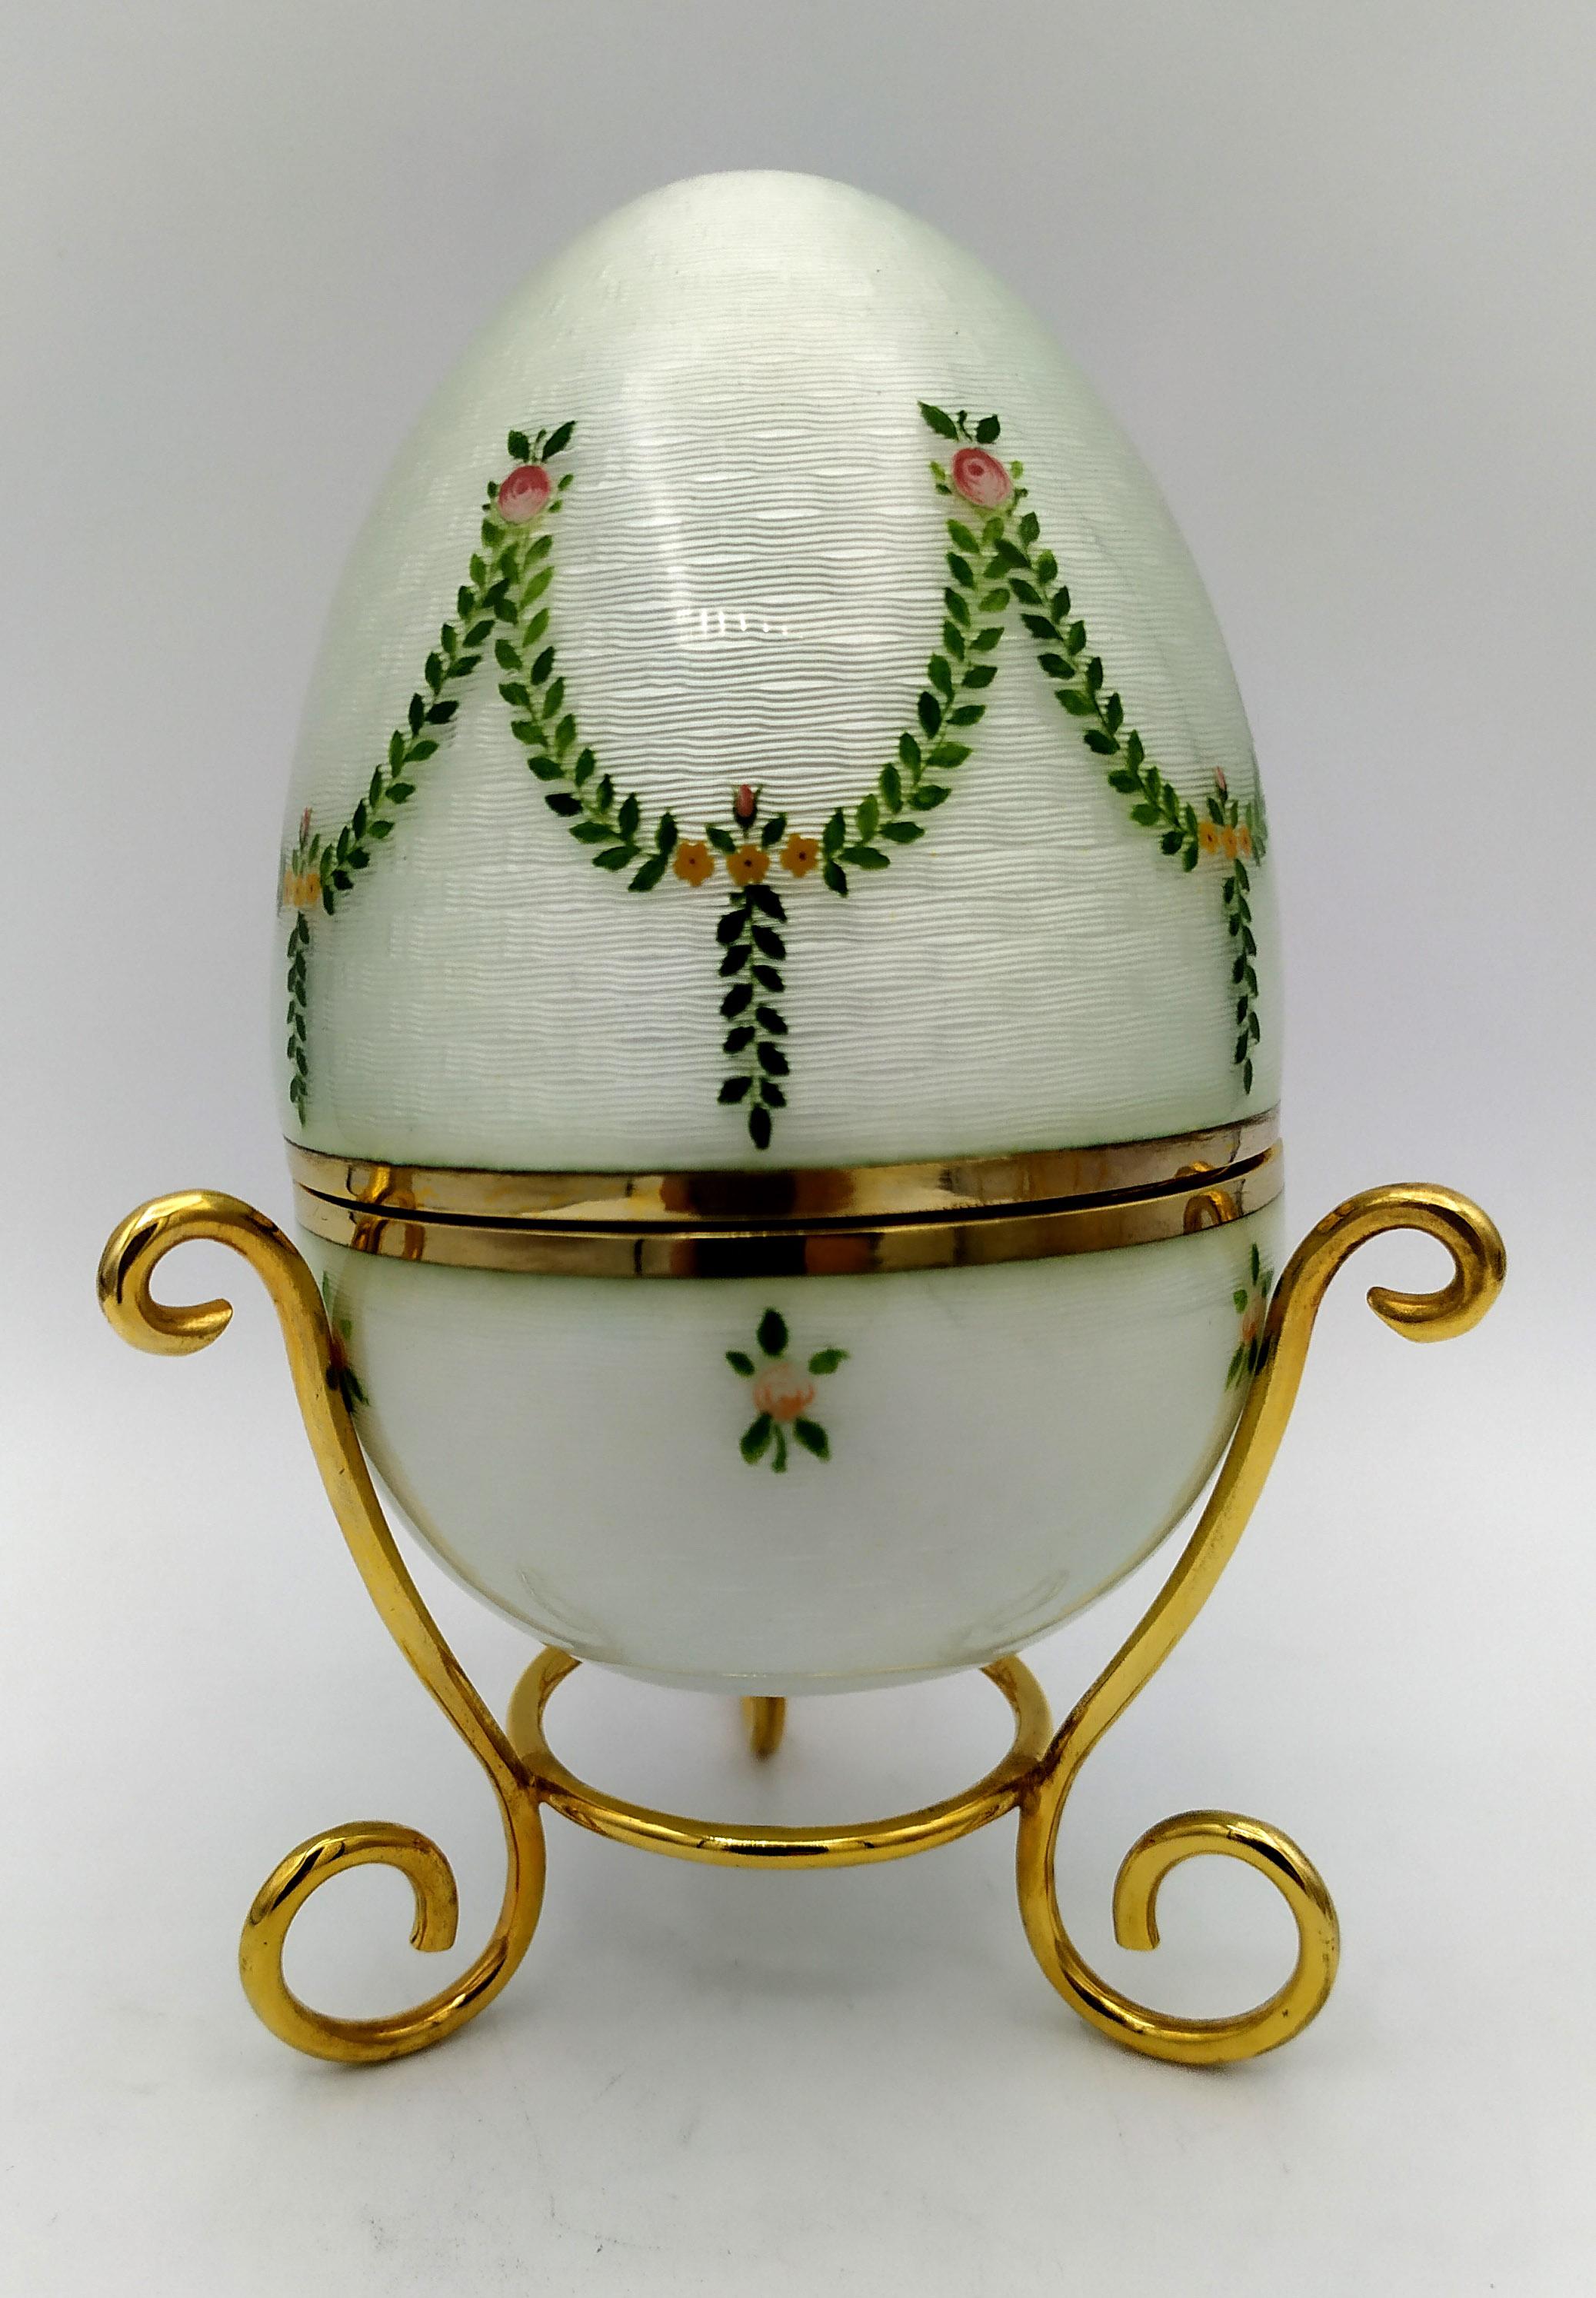 

Egg “music box” is in 925/1000 sterling silver.
Egg “music box” has fired enamels on guilloché and design engraved by hand.
Egg “music box”on smooth tripod containing a “music box” mechanism by the Swiss Maison Reuge
Egg “music box” is Russian